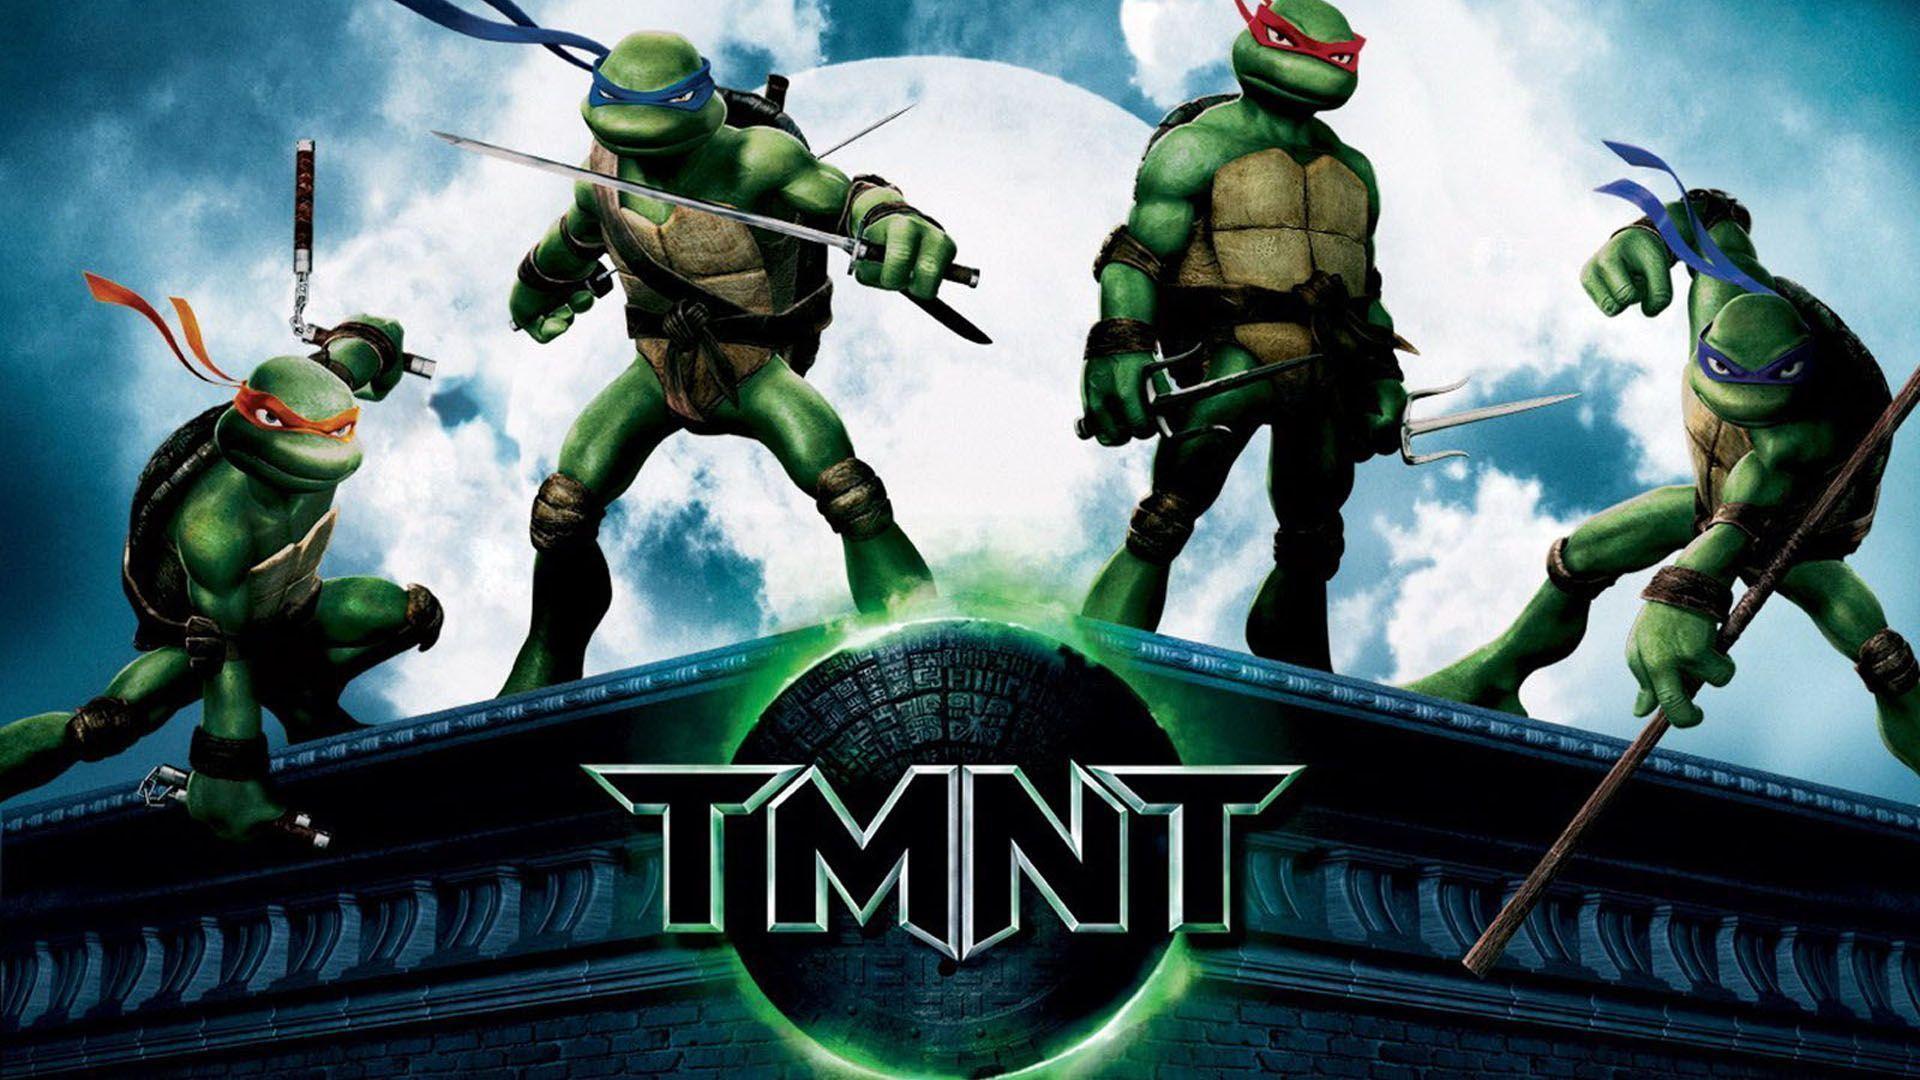 Tmnt Wallpaper For iPhone